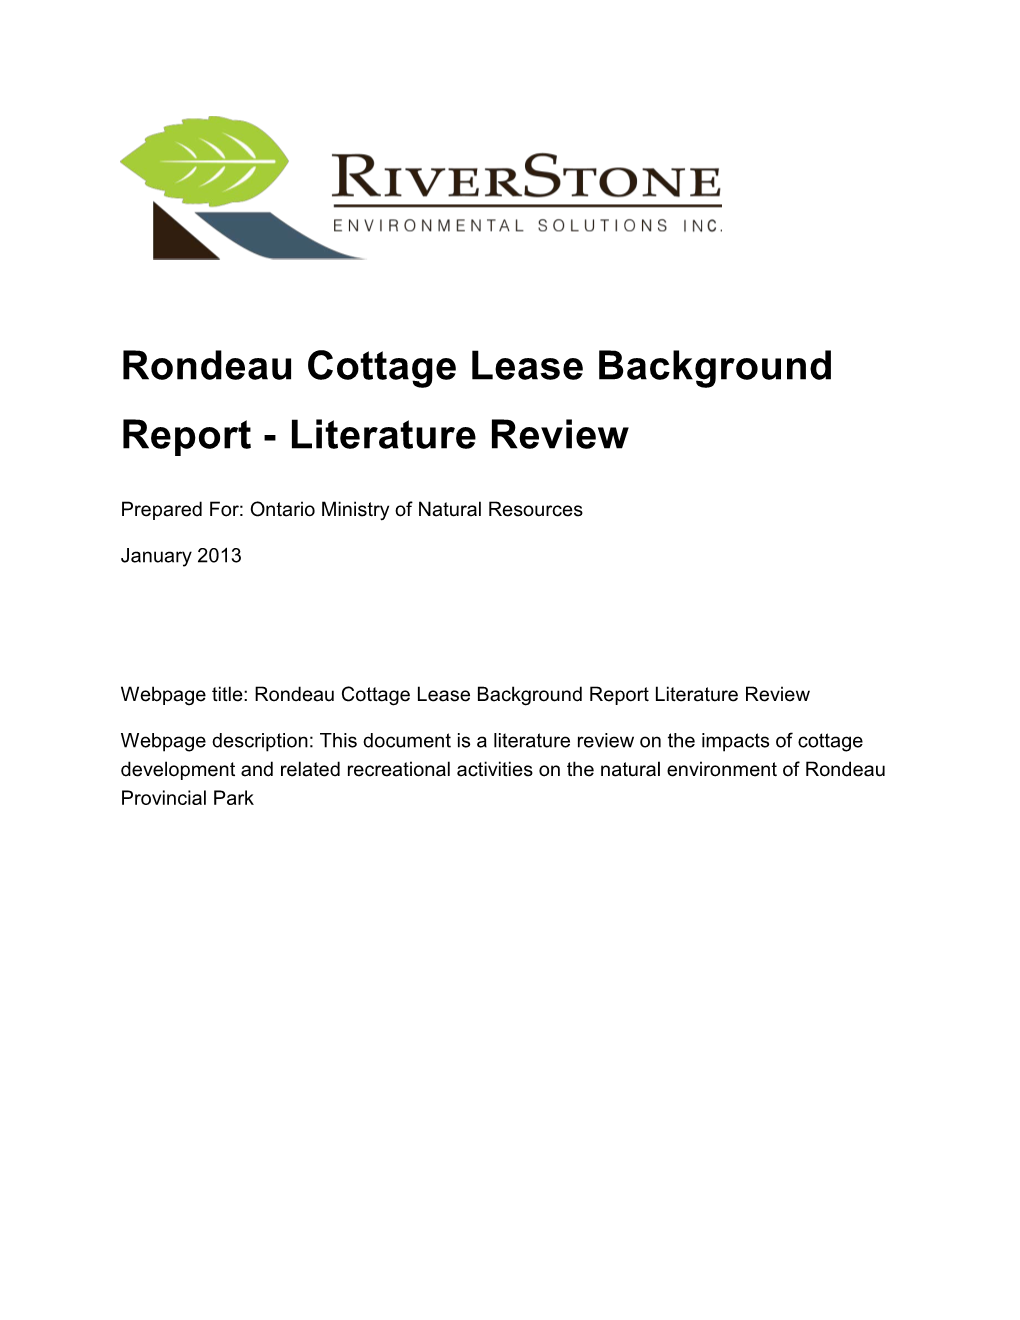 Rondeau Cottage Lease Background Report - Literature Review